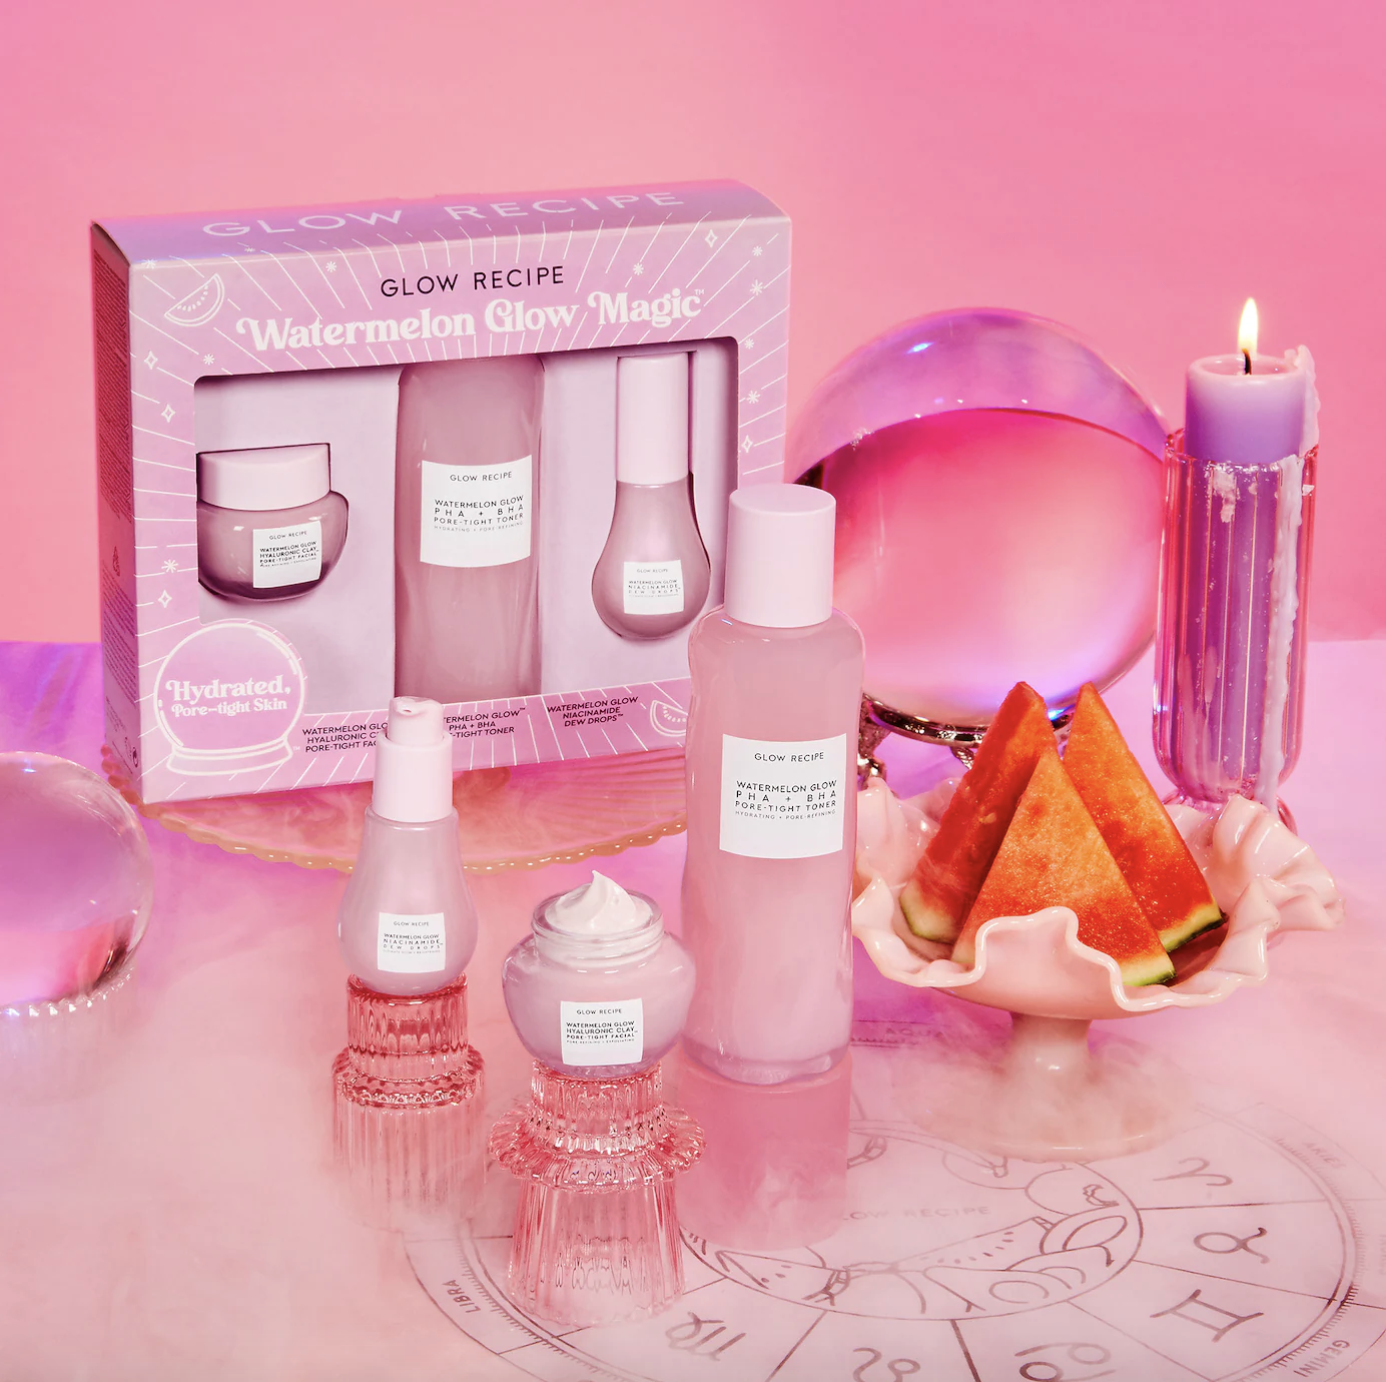 the packaged gift set of watermelon glow magic glow recipe bottles and the three containers of product in front of it with a crystal ball next to them